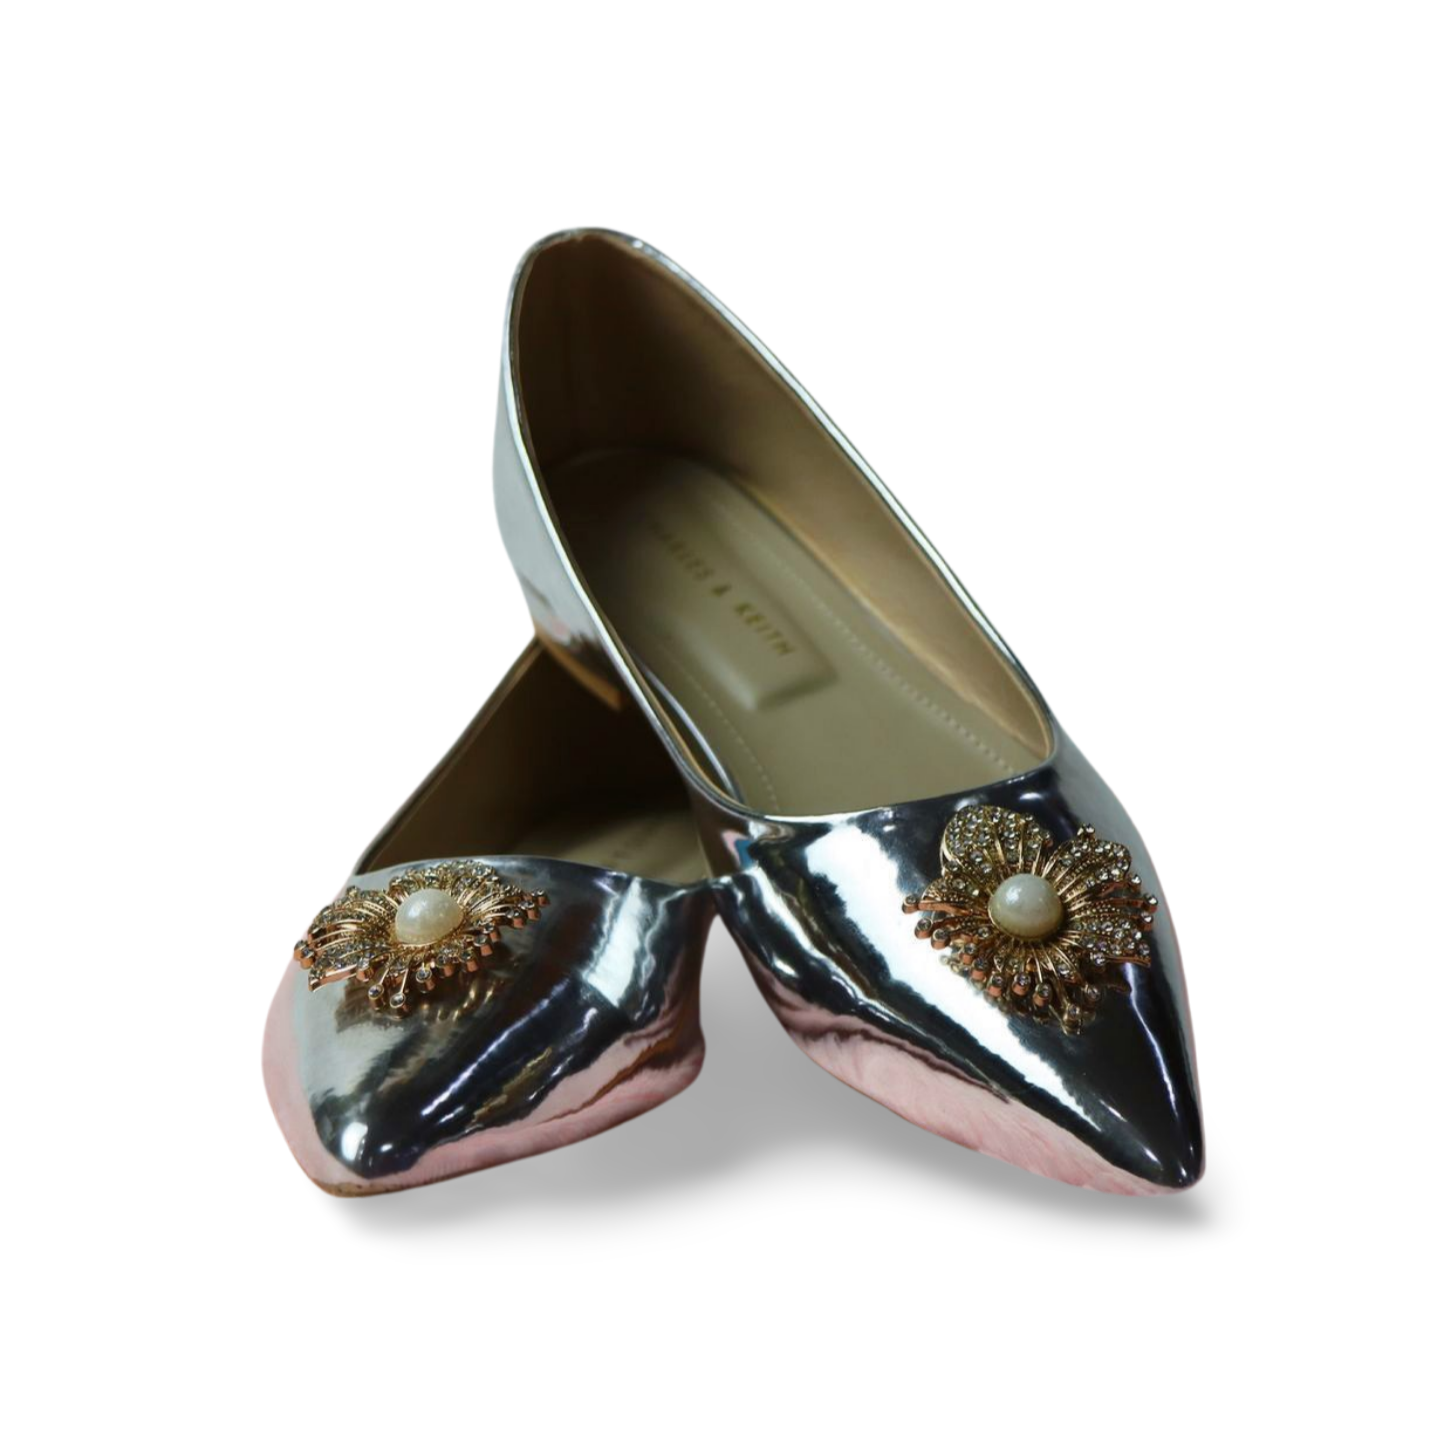 Elegant Pointed-Toe Flat Pumps with Pearl Embellishment